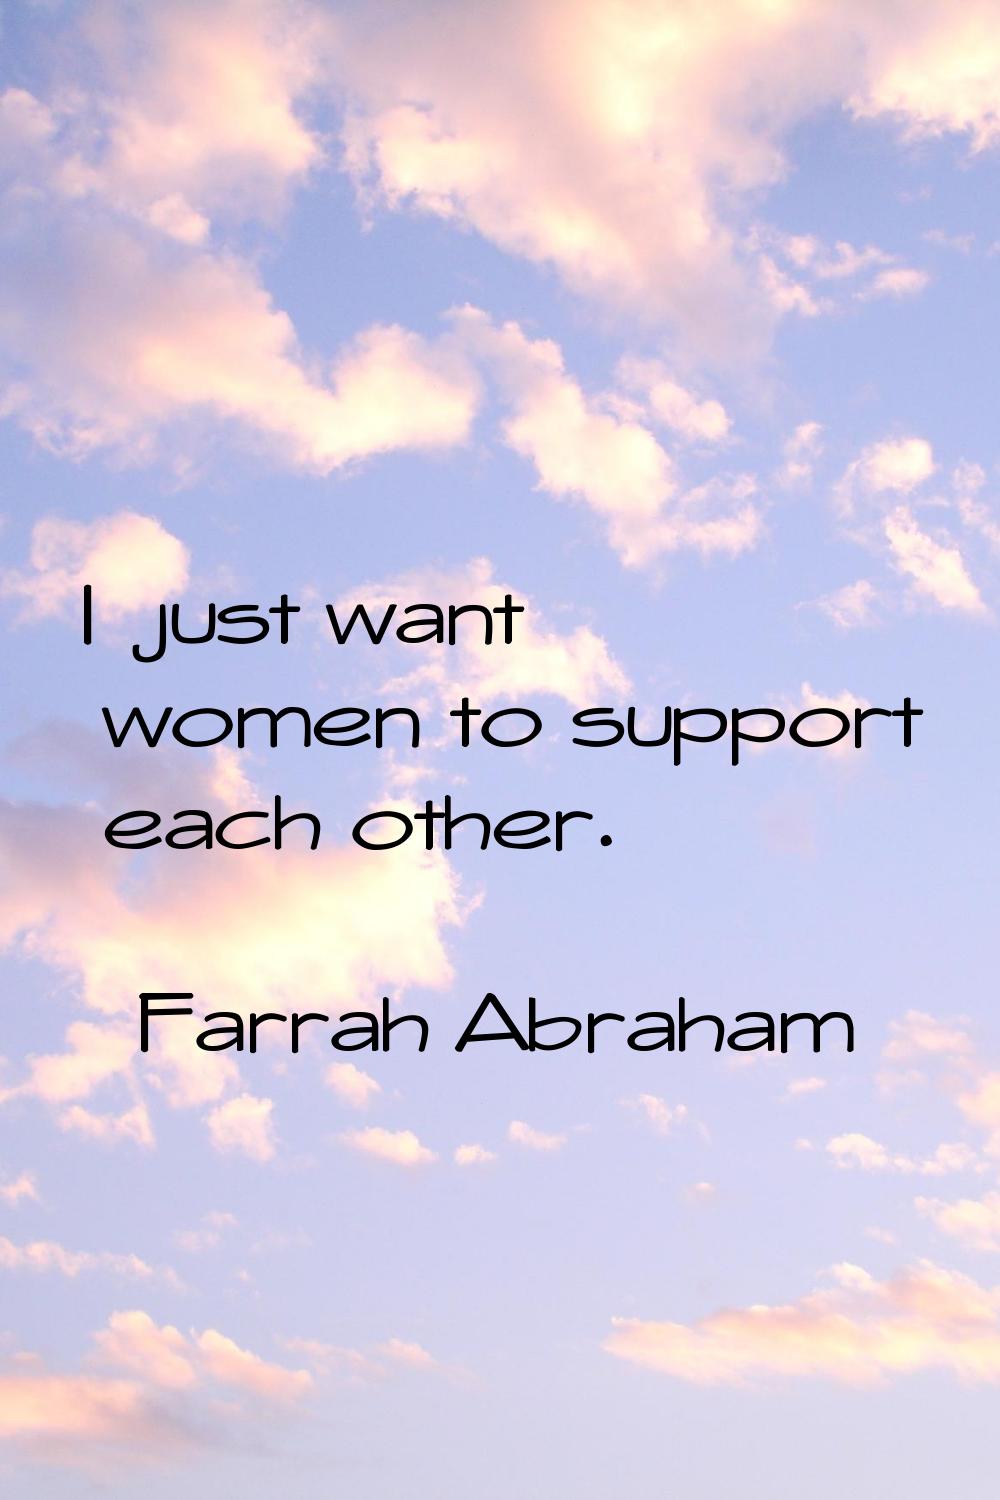 I just want women to support each other.